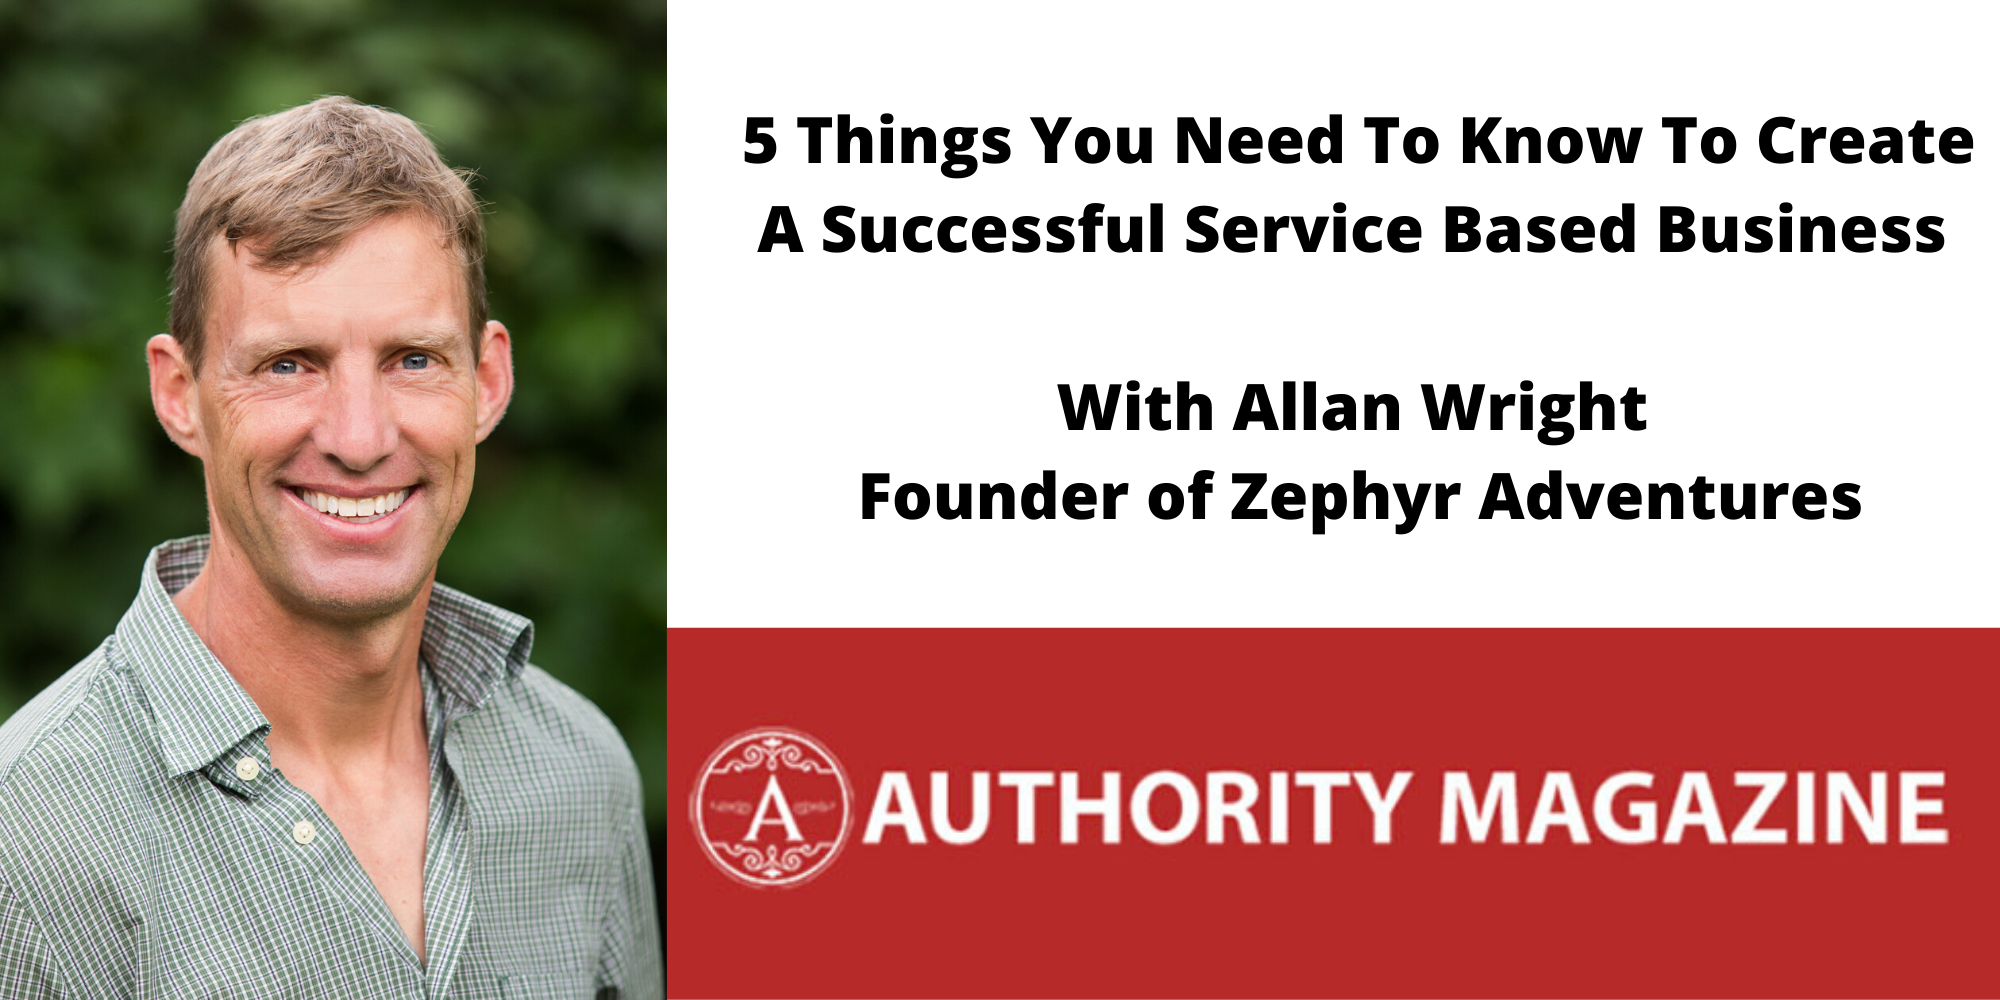 Interview With Allan Wright – 5 Things You Need To Know To Create A Successful Service Based Business